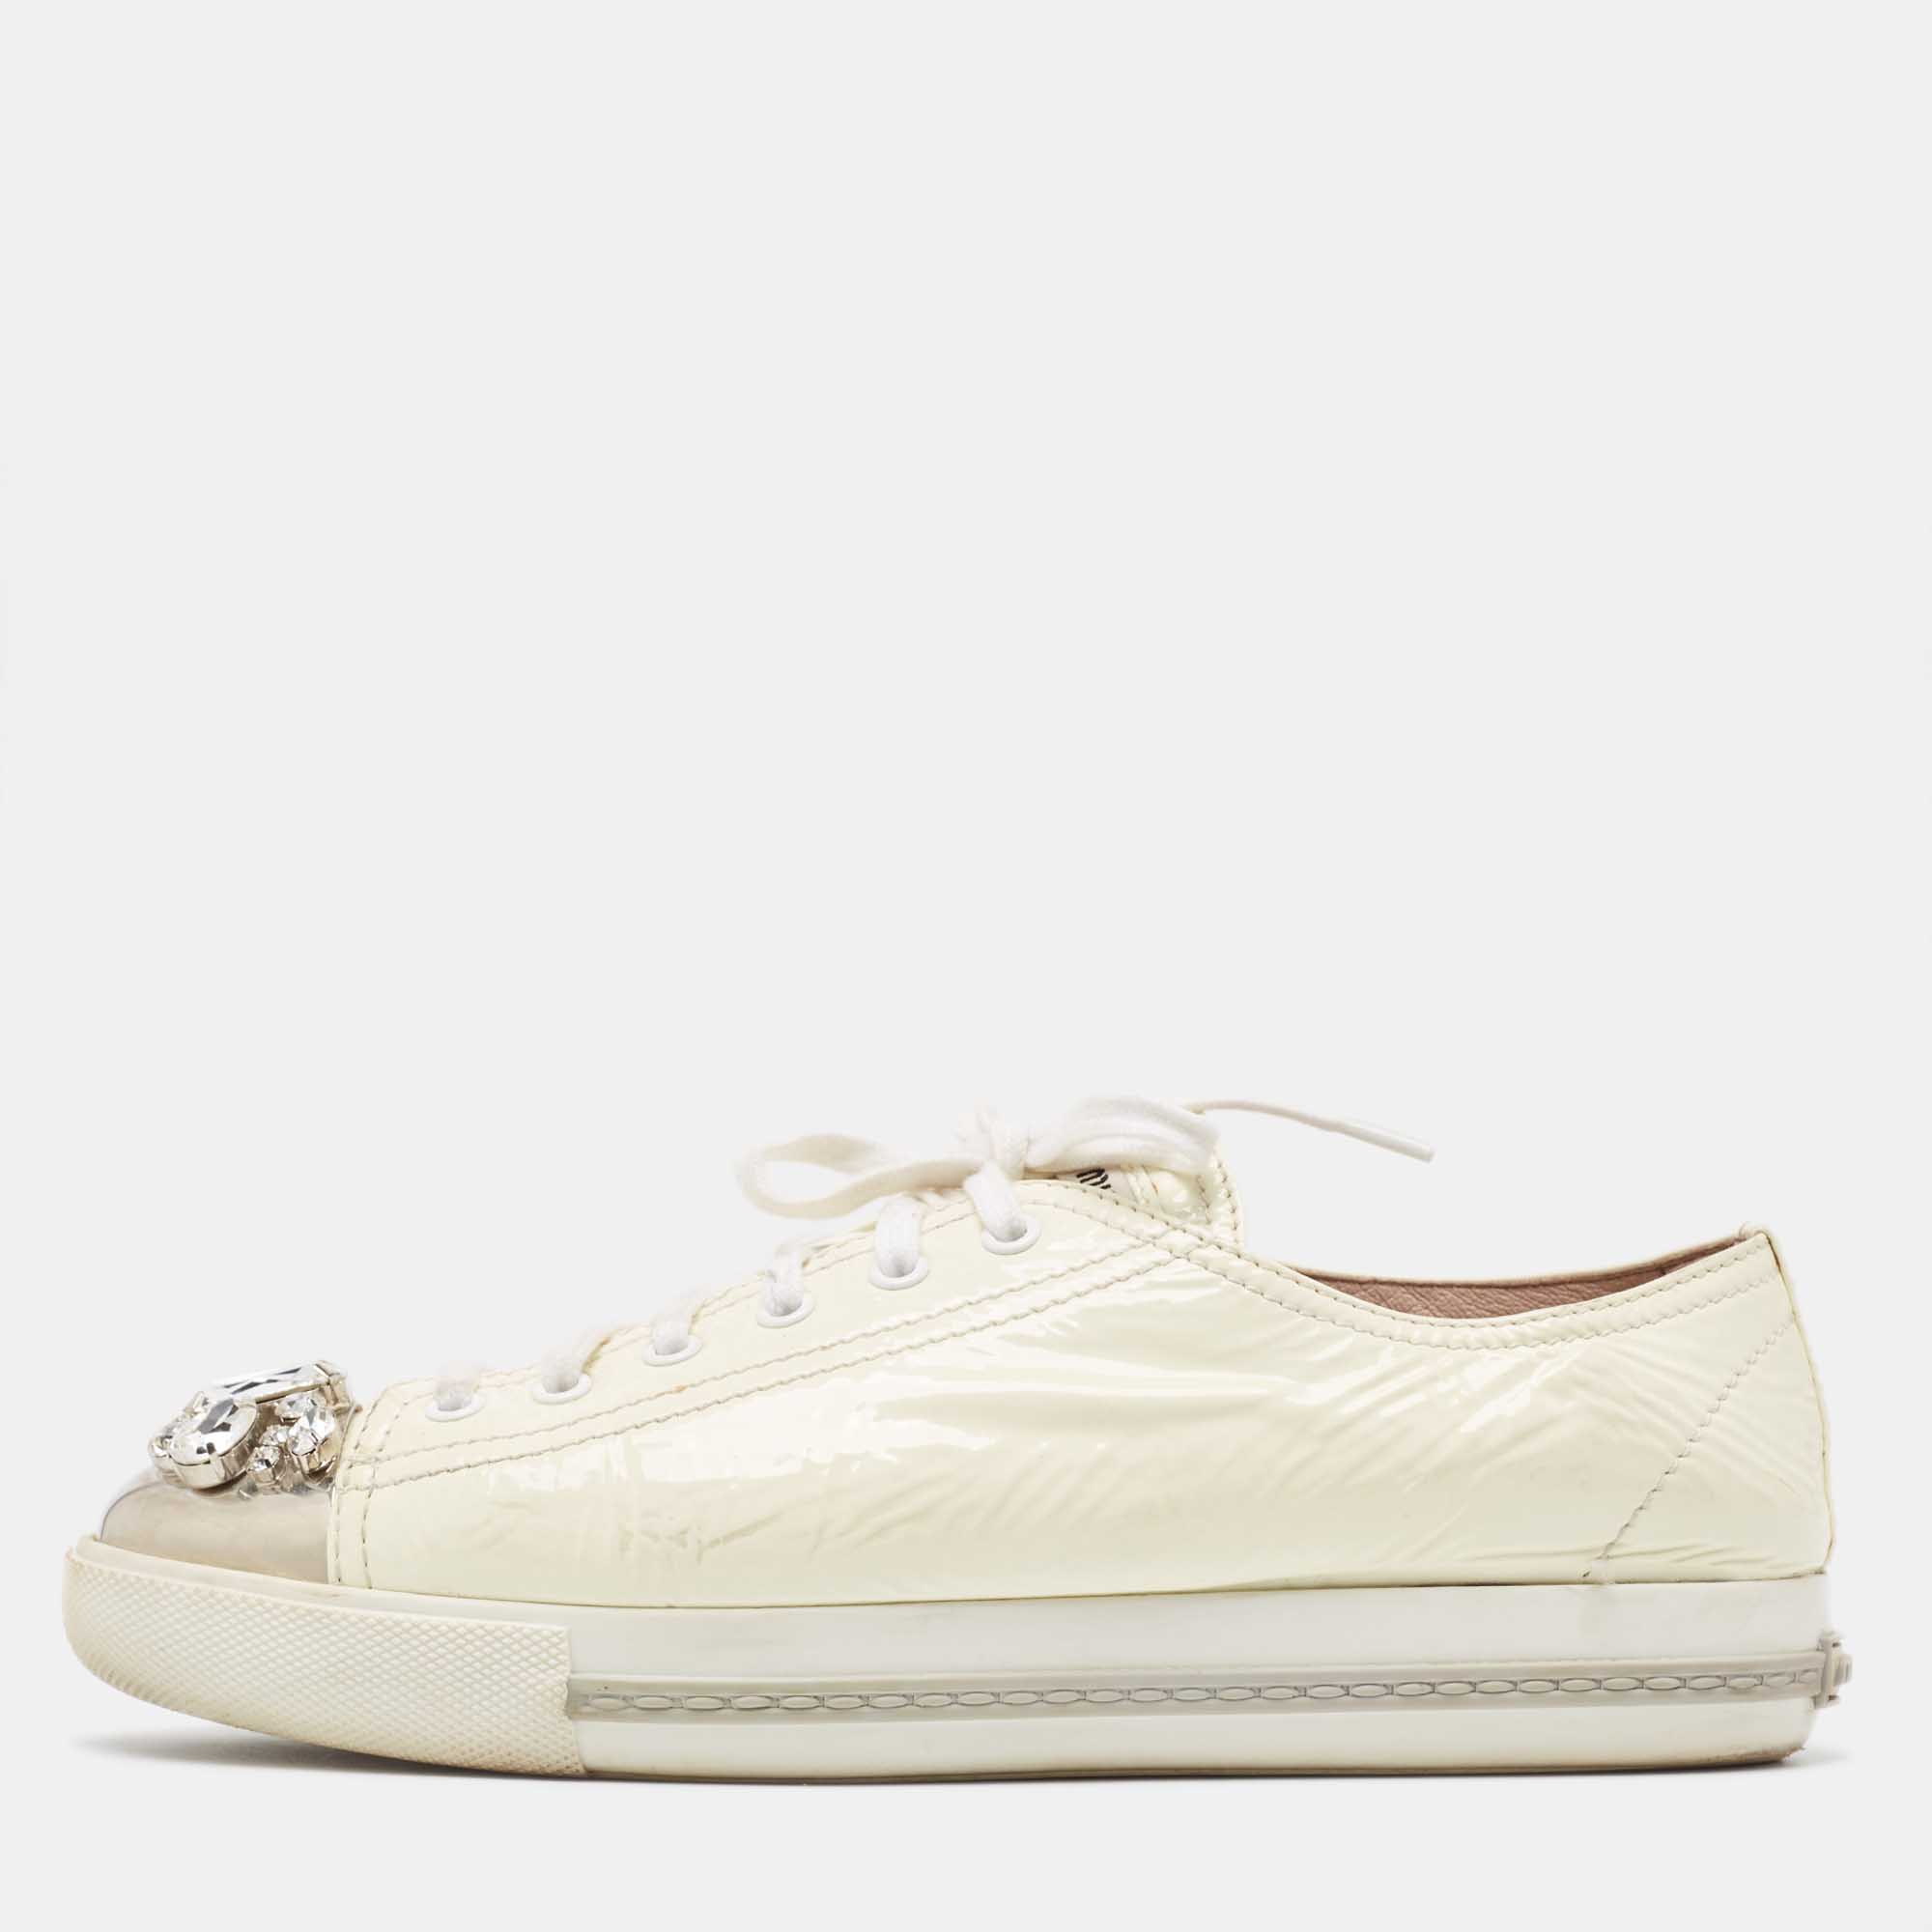 Pre-owned Miu Miu Patent Leather Crystal Embellished Cap Toe Lace Up Sneaker Size 41 In White